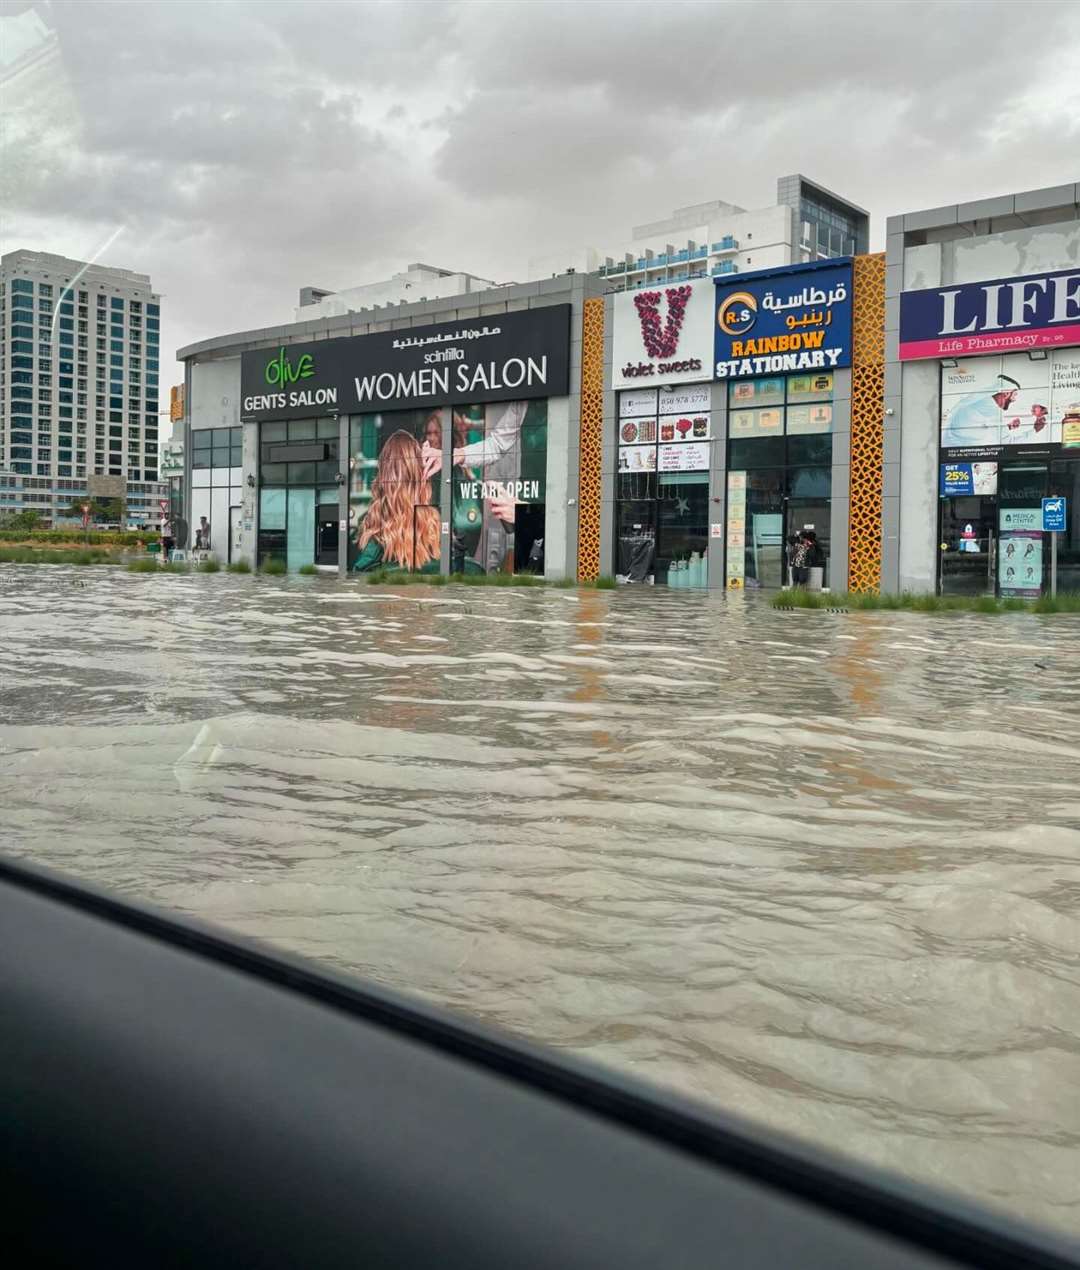 The UAE city has been submerged by the heaviest rainfall seen in 75 years